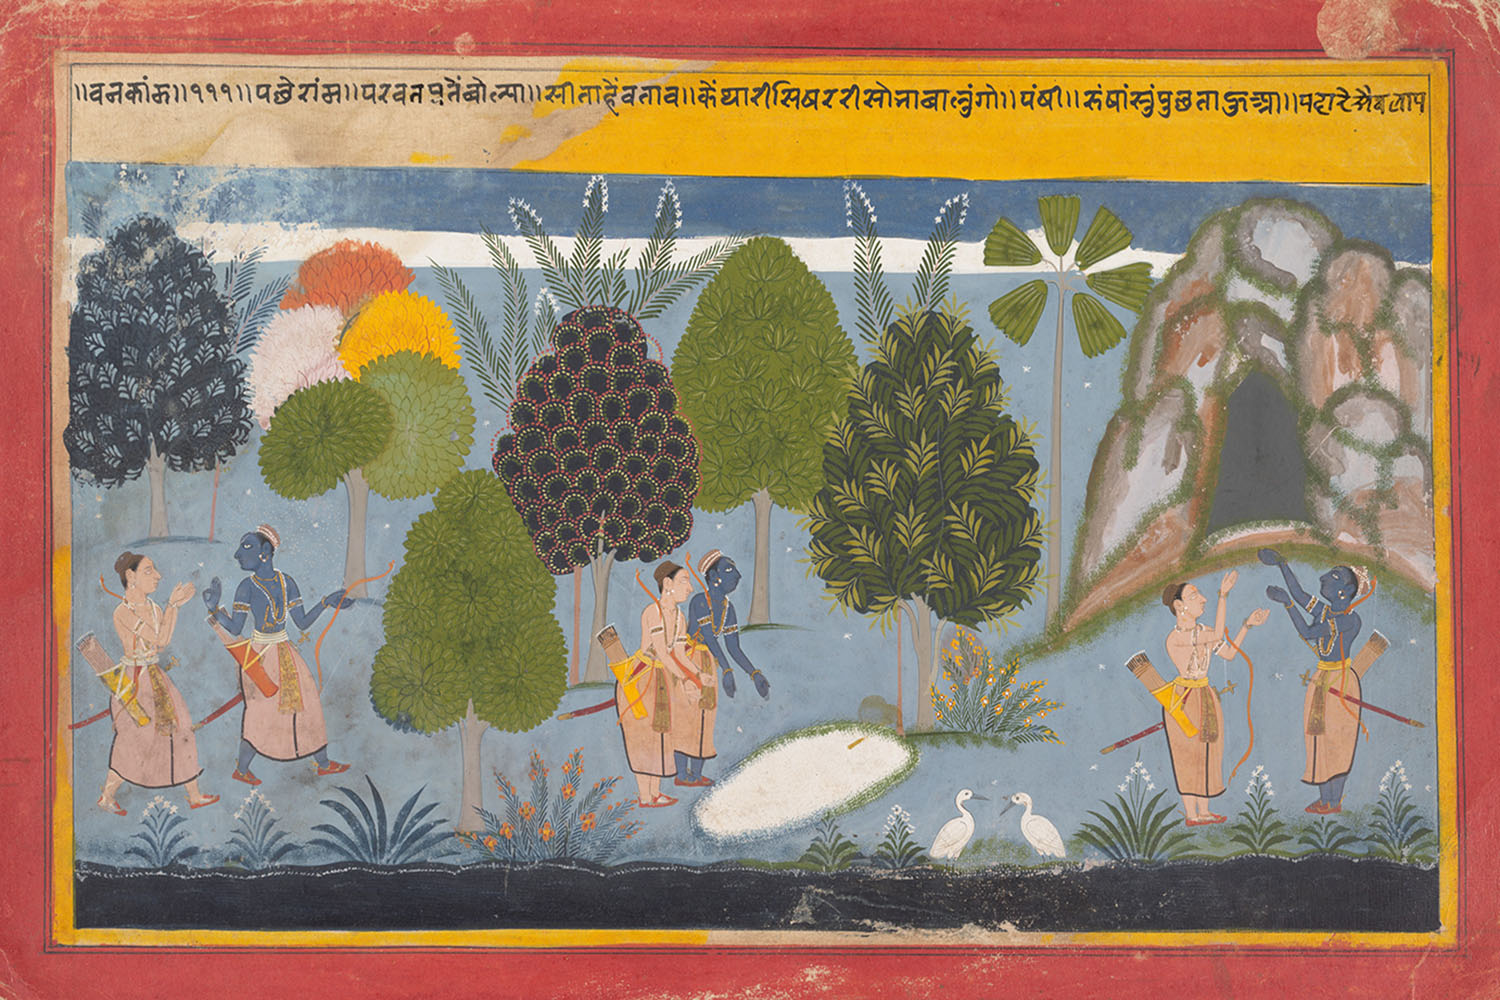 A painting depicting a scene from the Ramayana, wherein Rama and Lakshmana search for Sita in a forest.